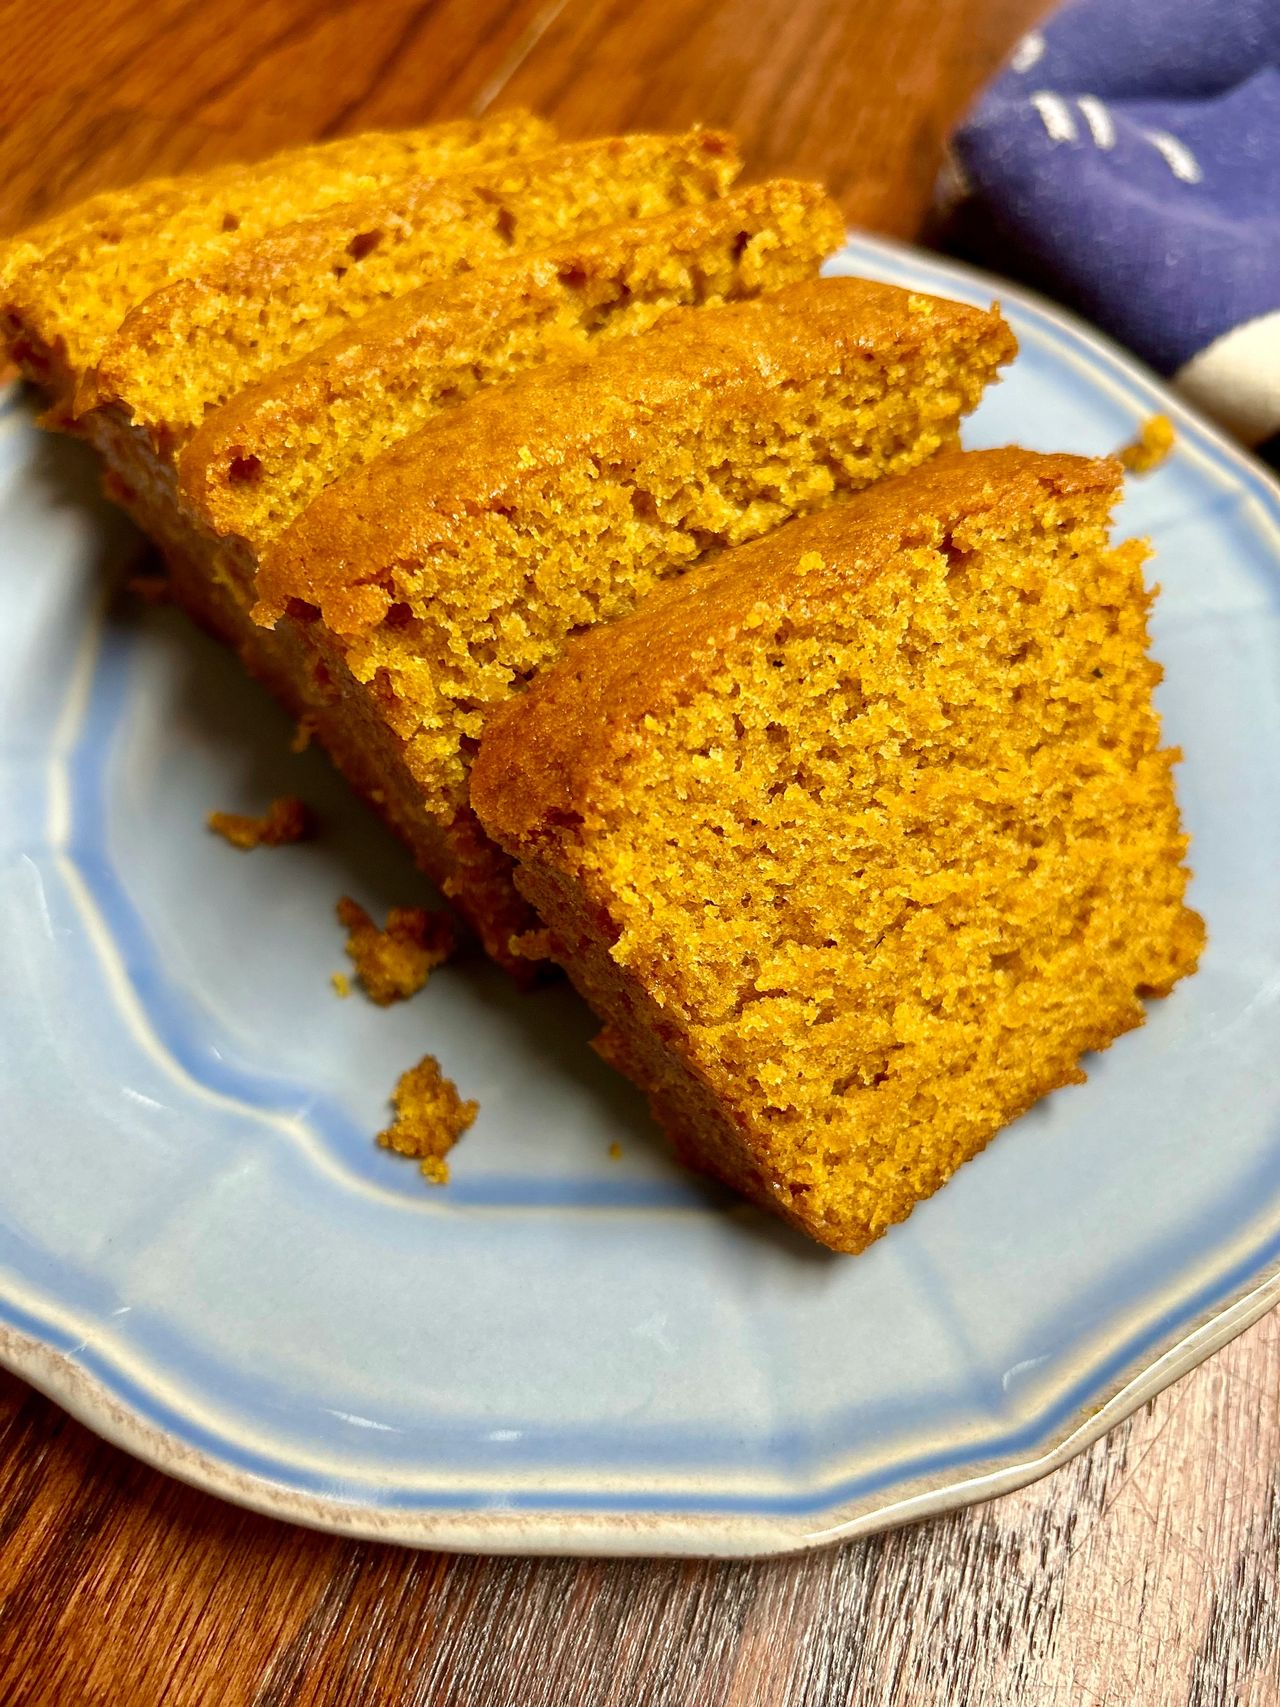 Slices of pumpkin bread on a blue plate.